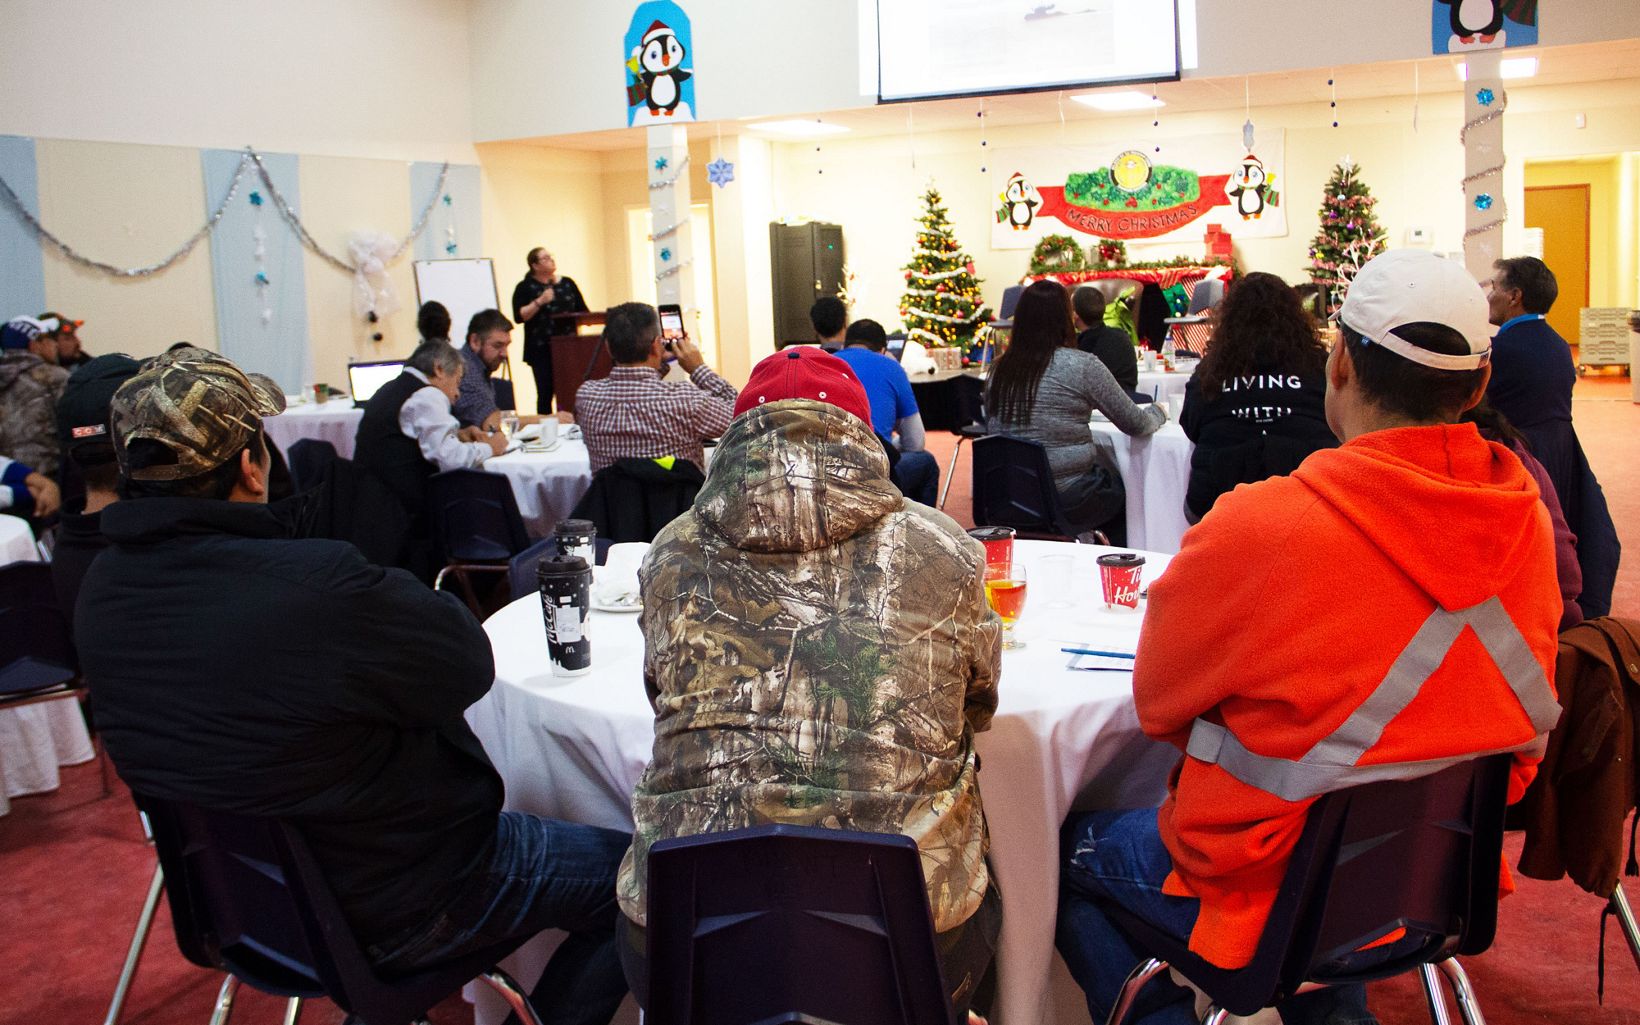 A gathering of First Nations at the northern Manitoba moose workshop organized by Nature United and partners.